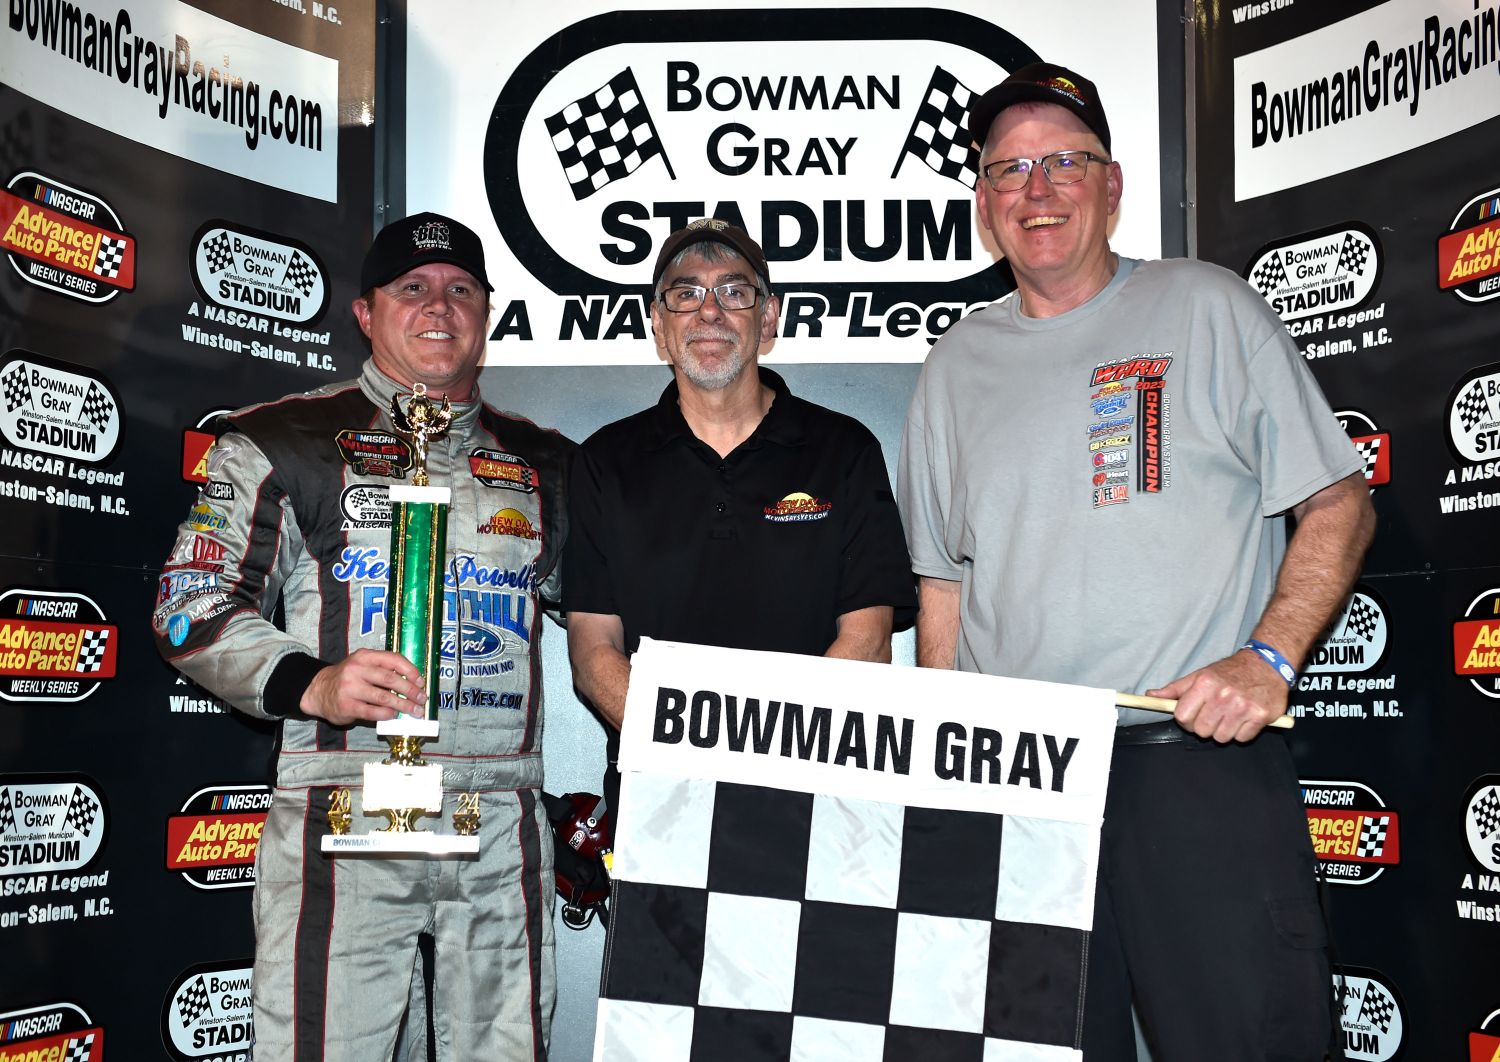 Exciting Wins by Ward, Butner, and More at Bowman Gray Stadium